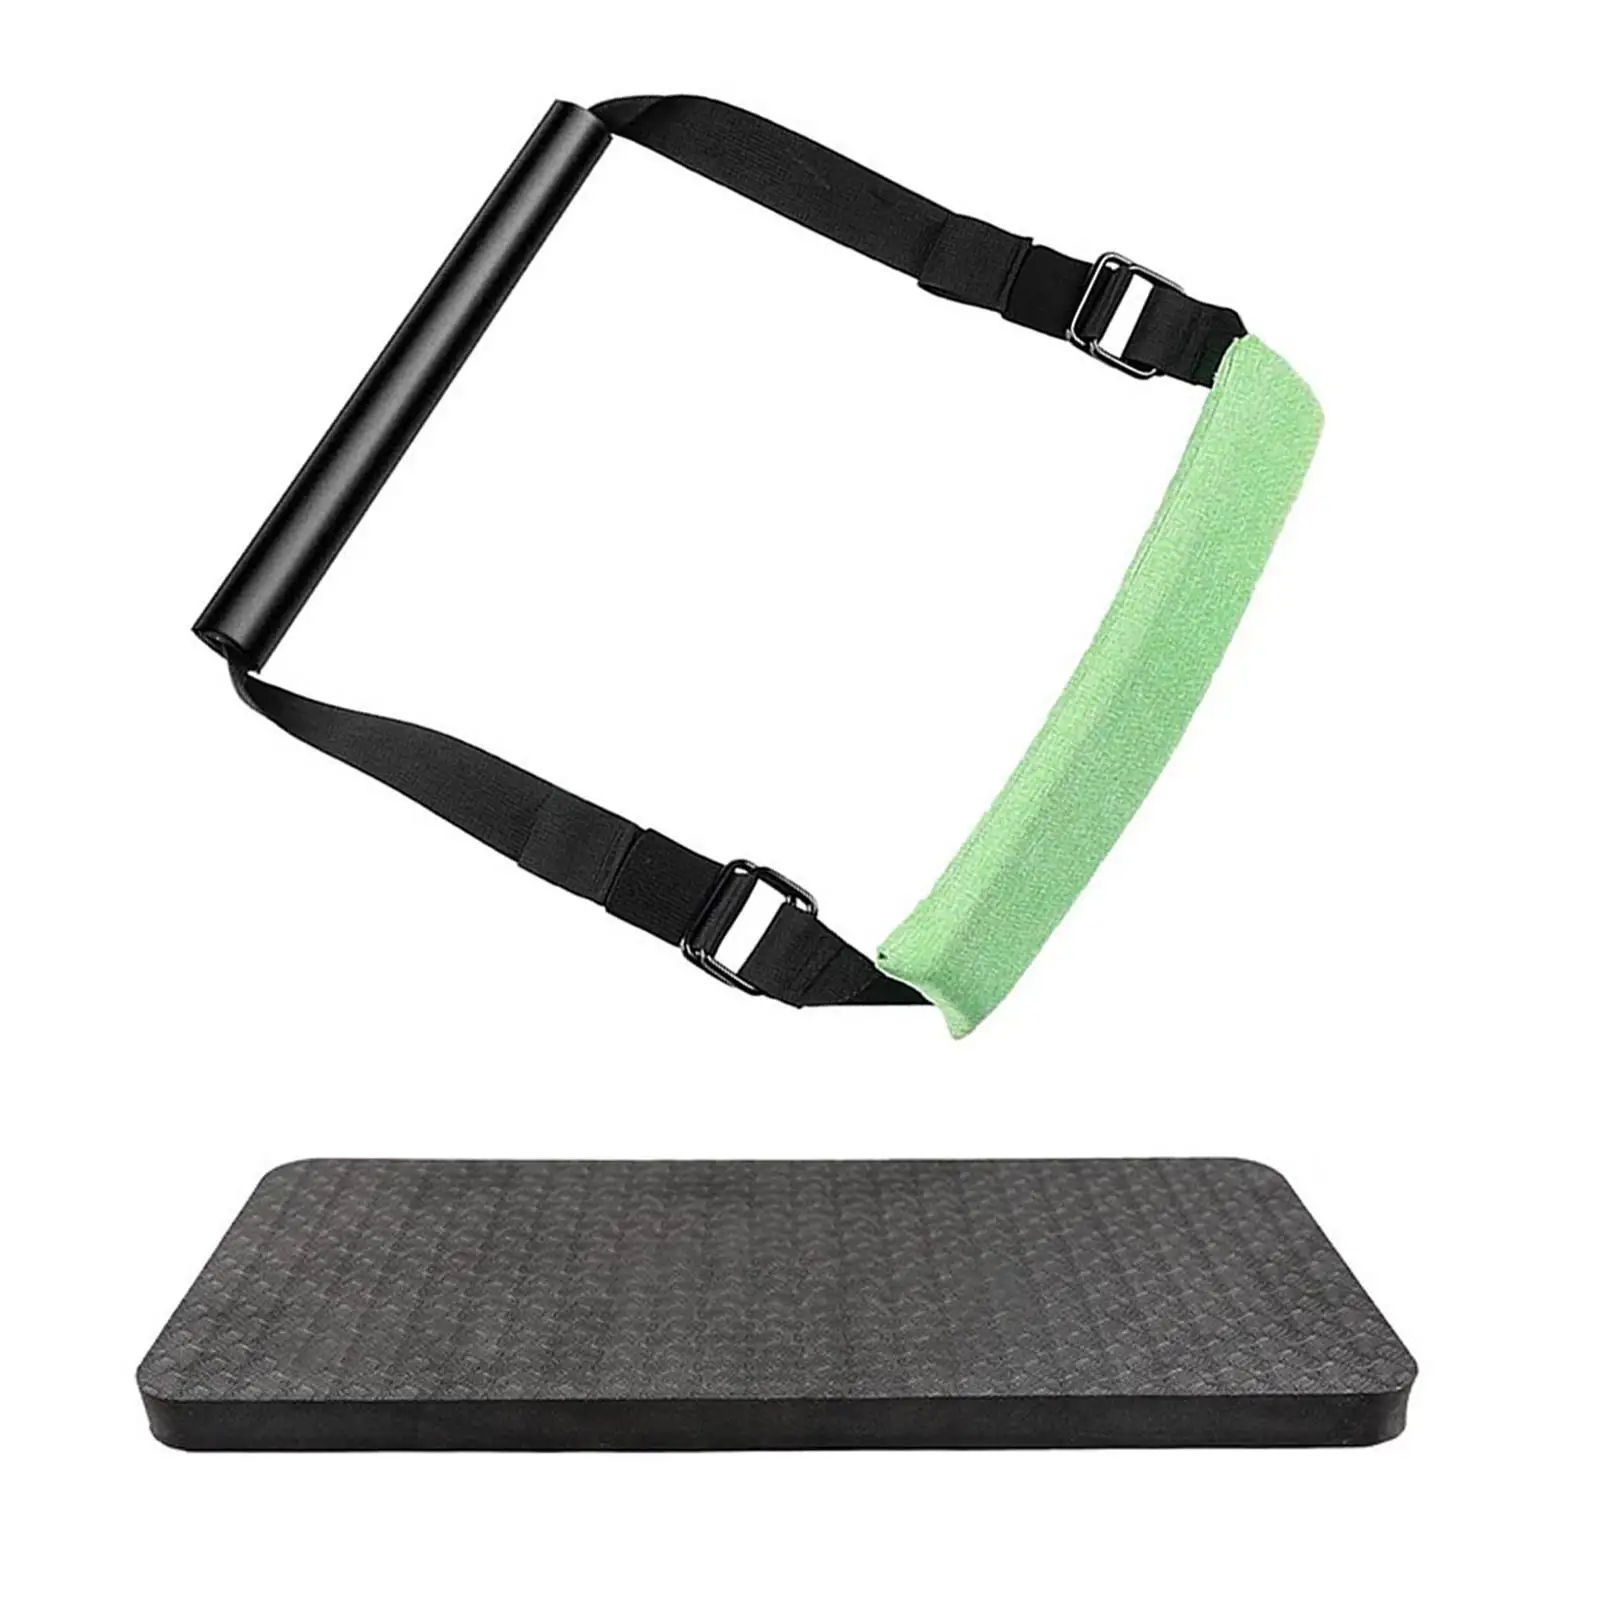 Hamstring Curl Strap for Door Bed with Kneeling Pad Padded Foot Holder for Workout Home Gym Women Fitness Strength Training